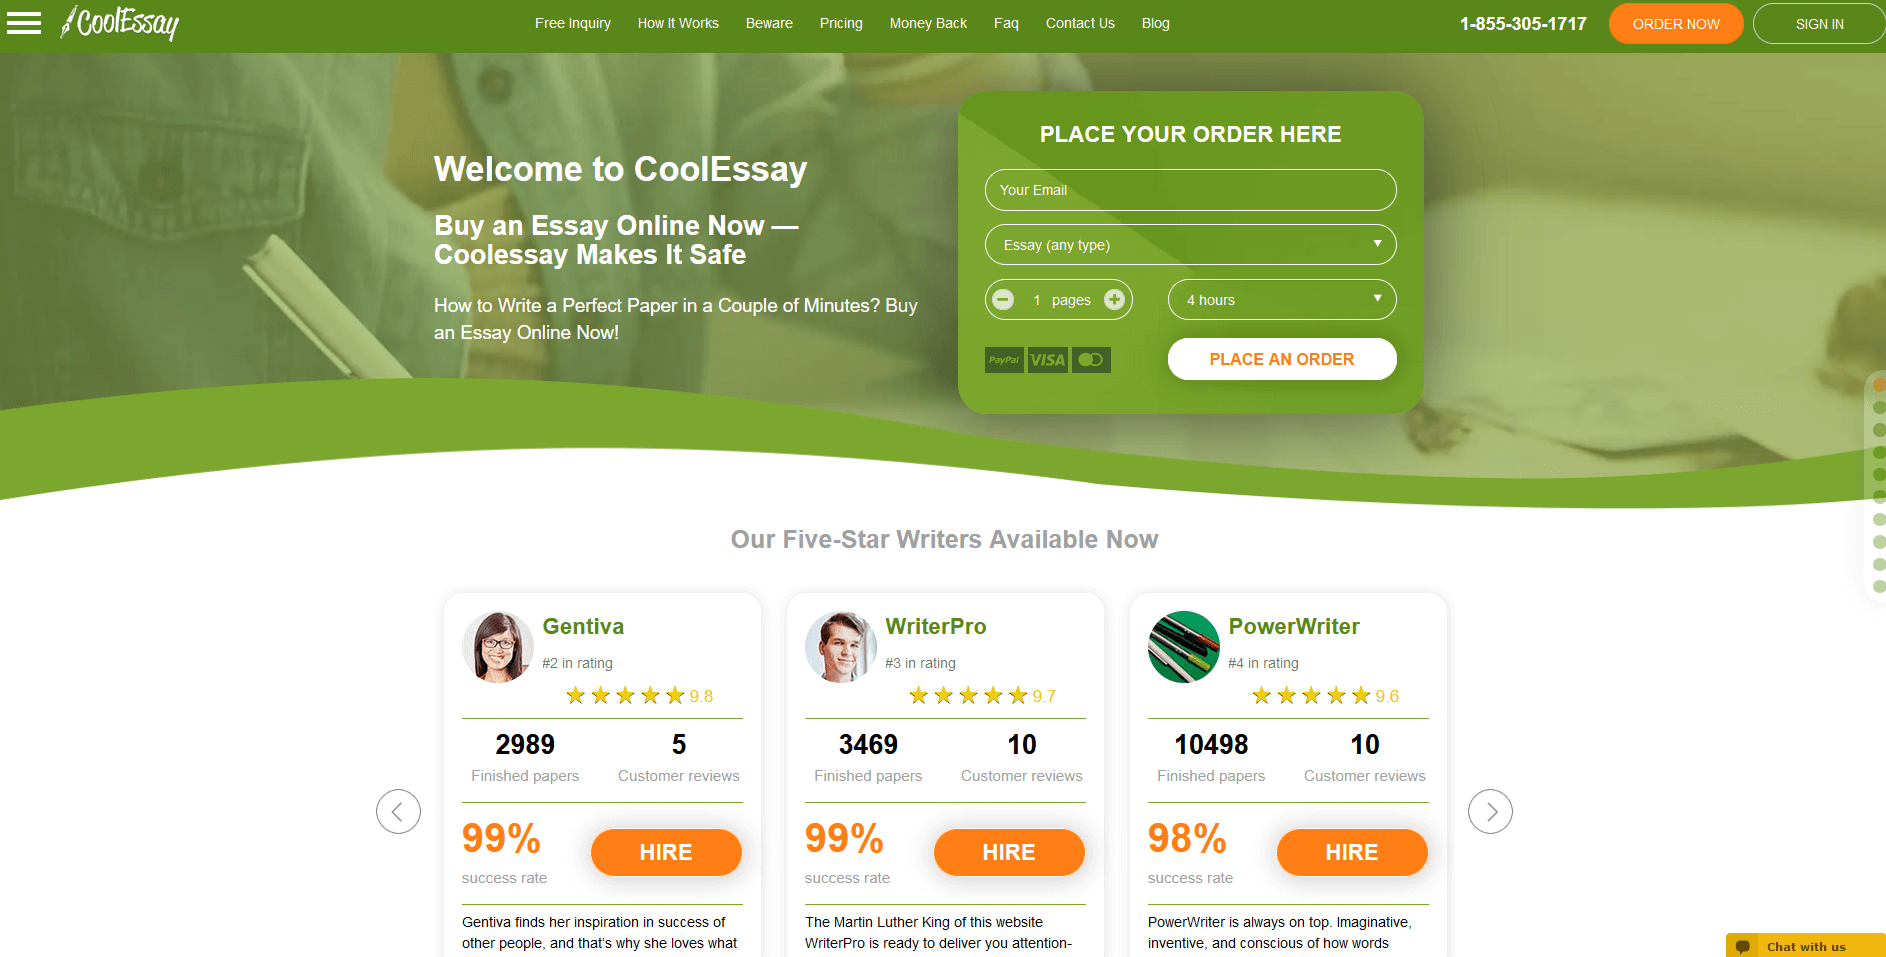 Coolessay Writing Service Review by TopEssayCompanies